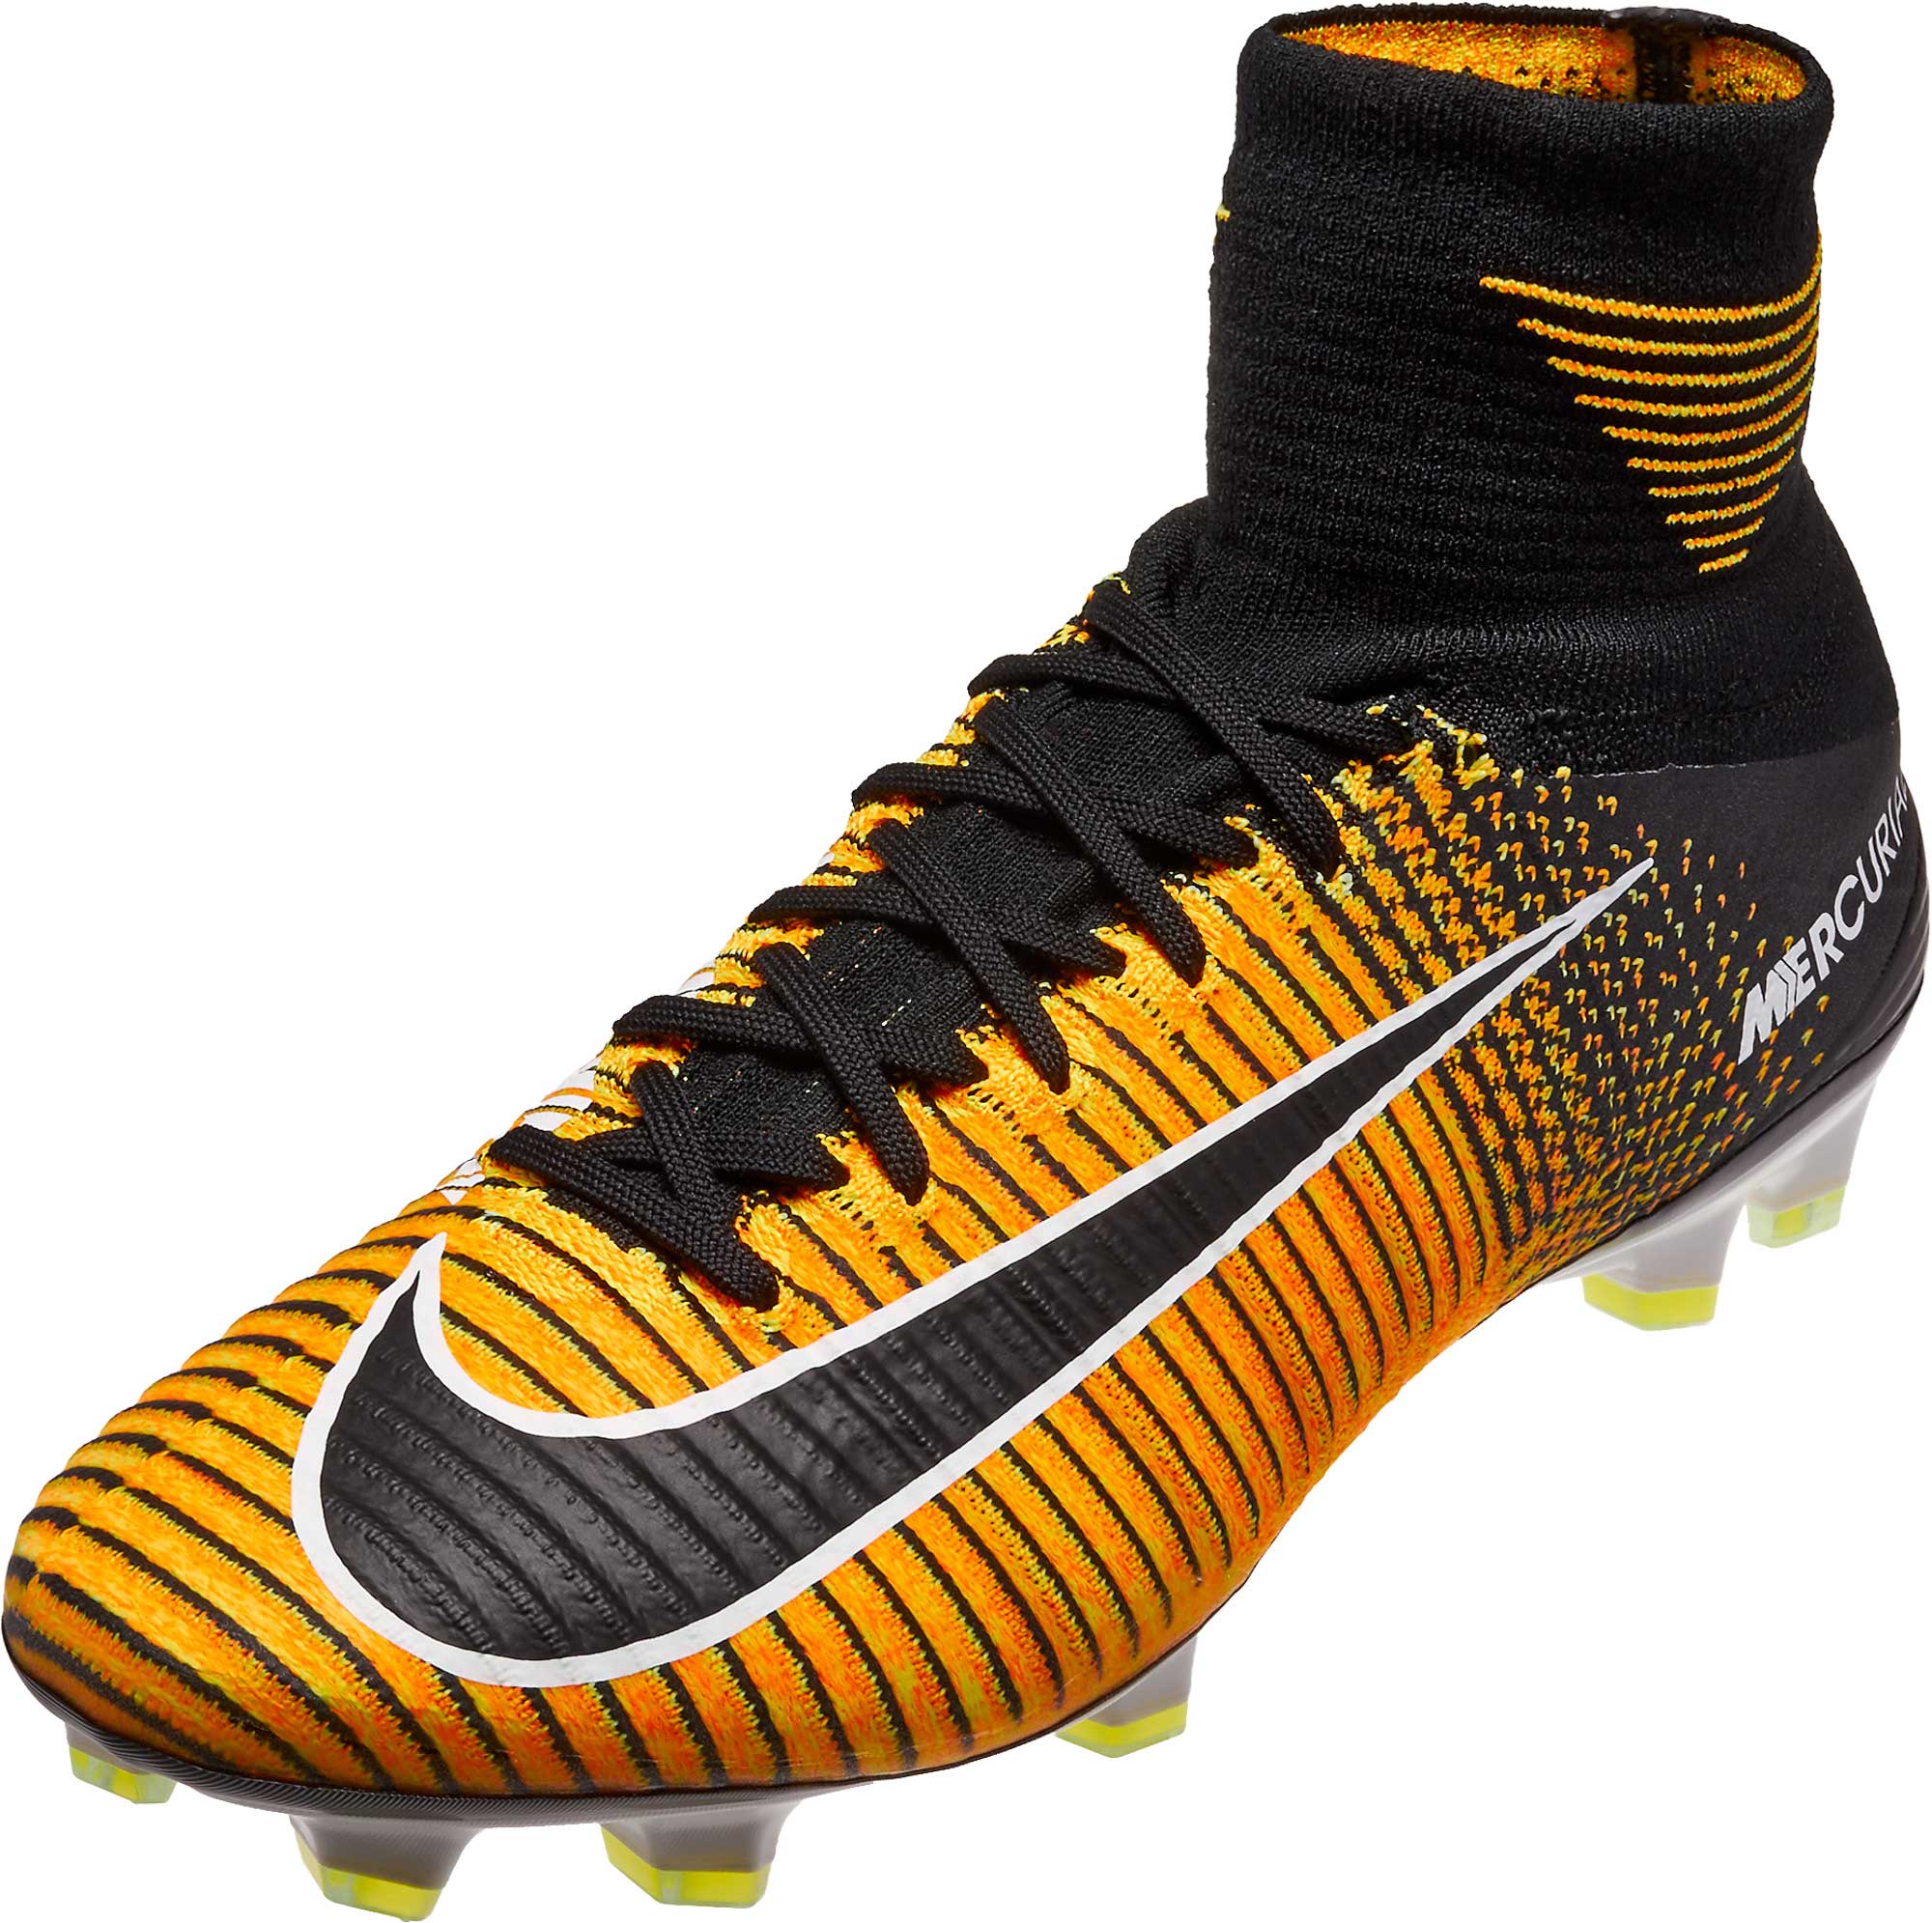 mercurial yellow and black